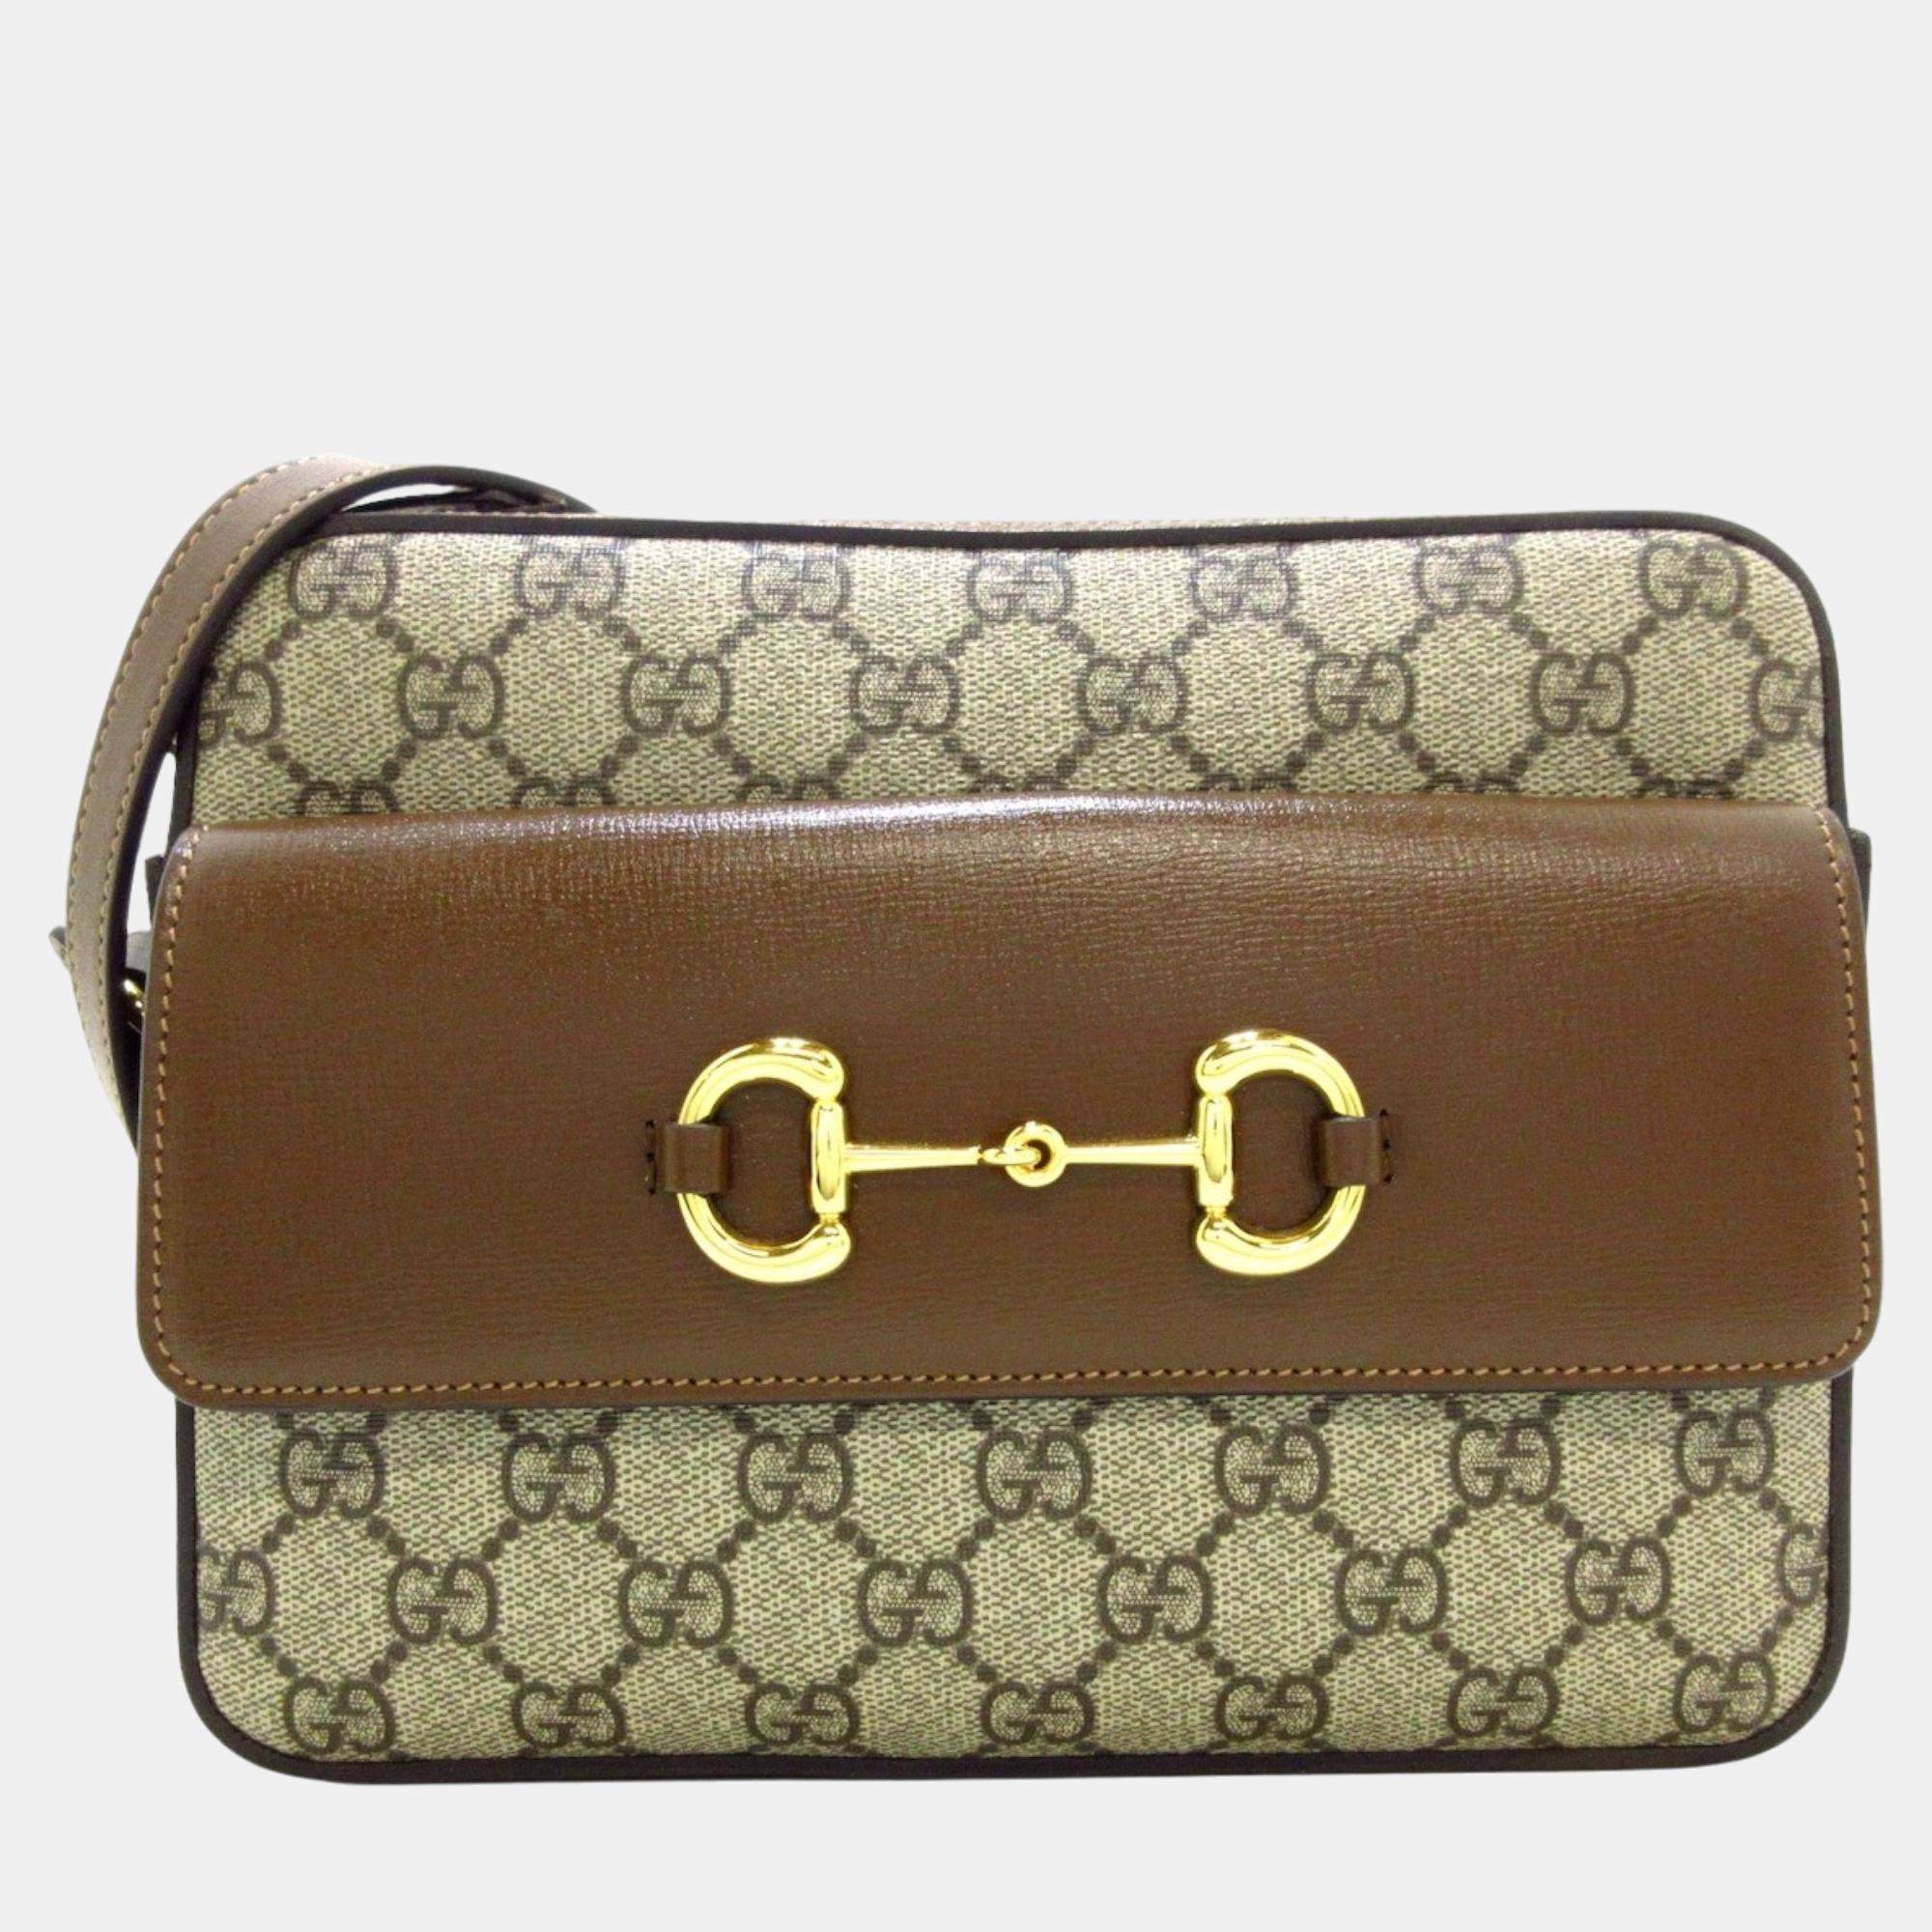 Gucci Horsebit 1955 small shoulder bag in brown leather